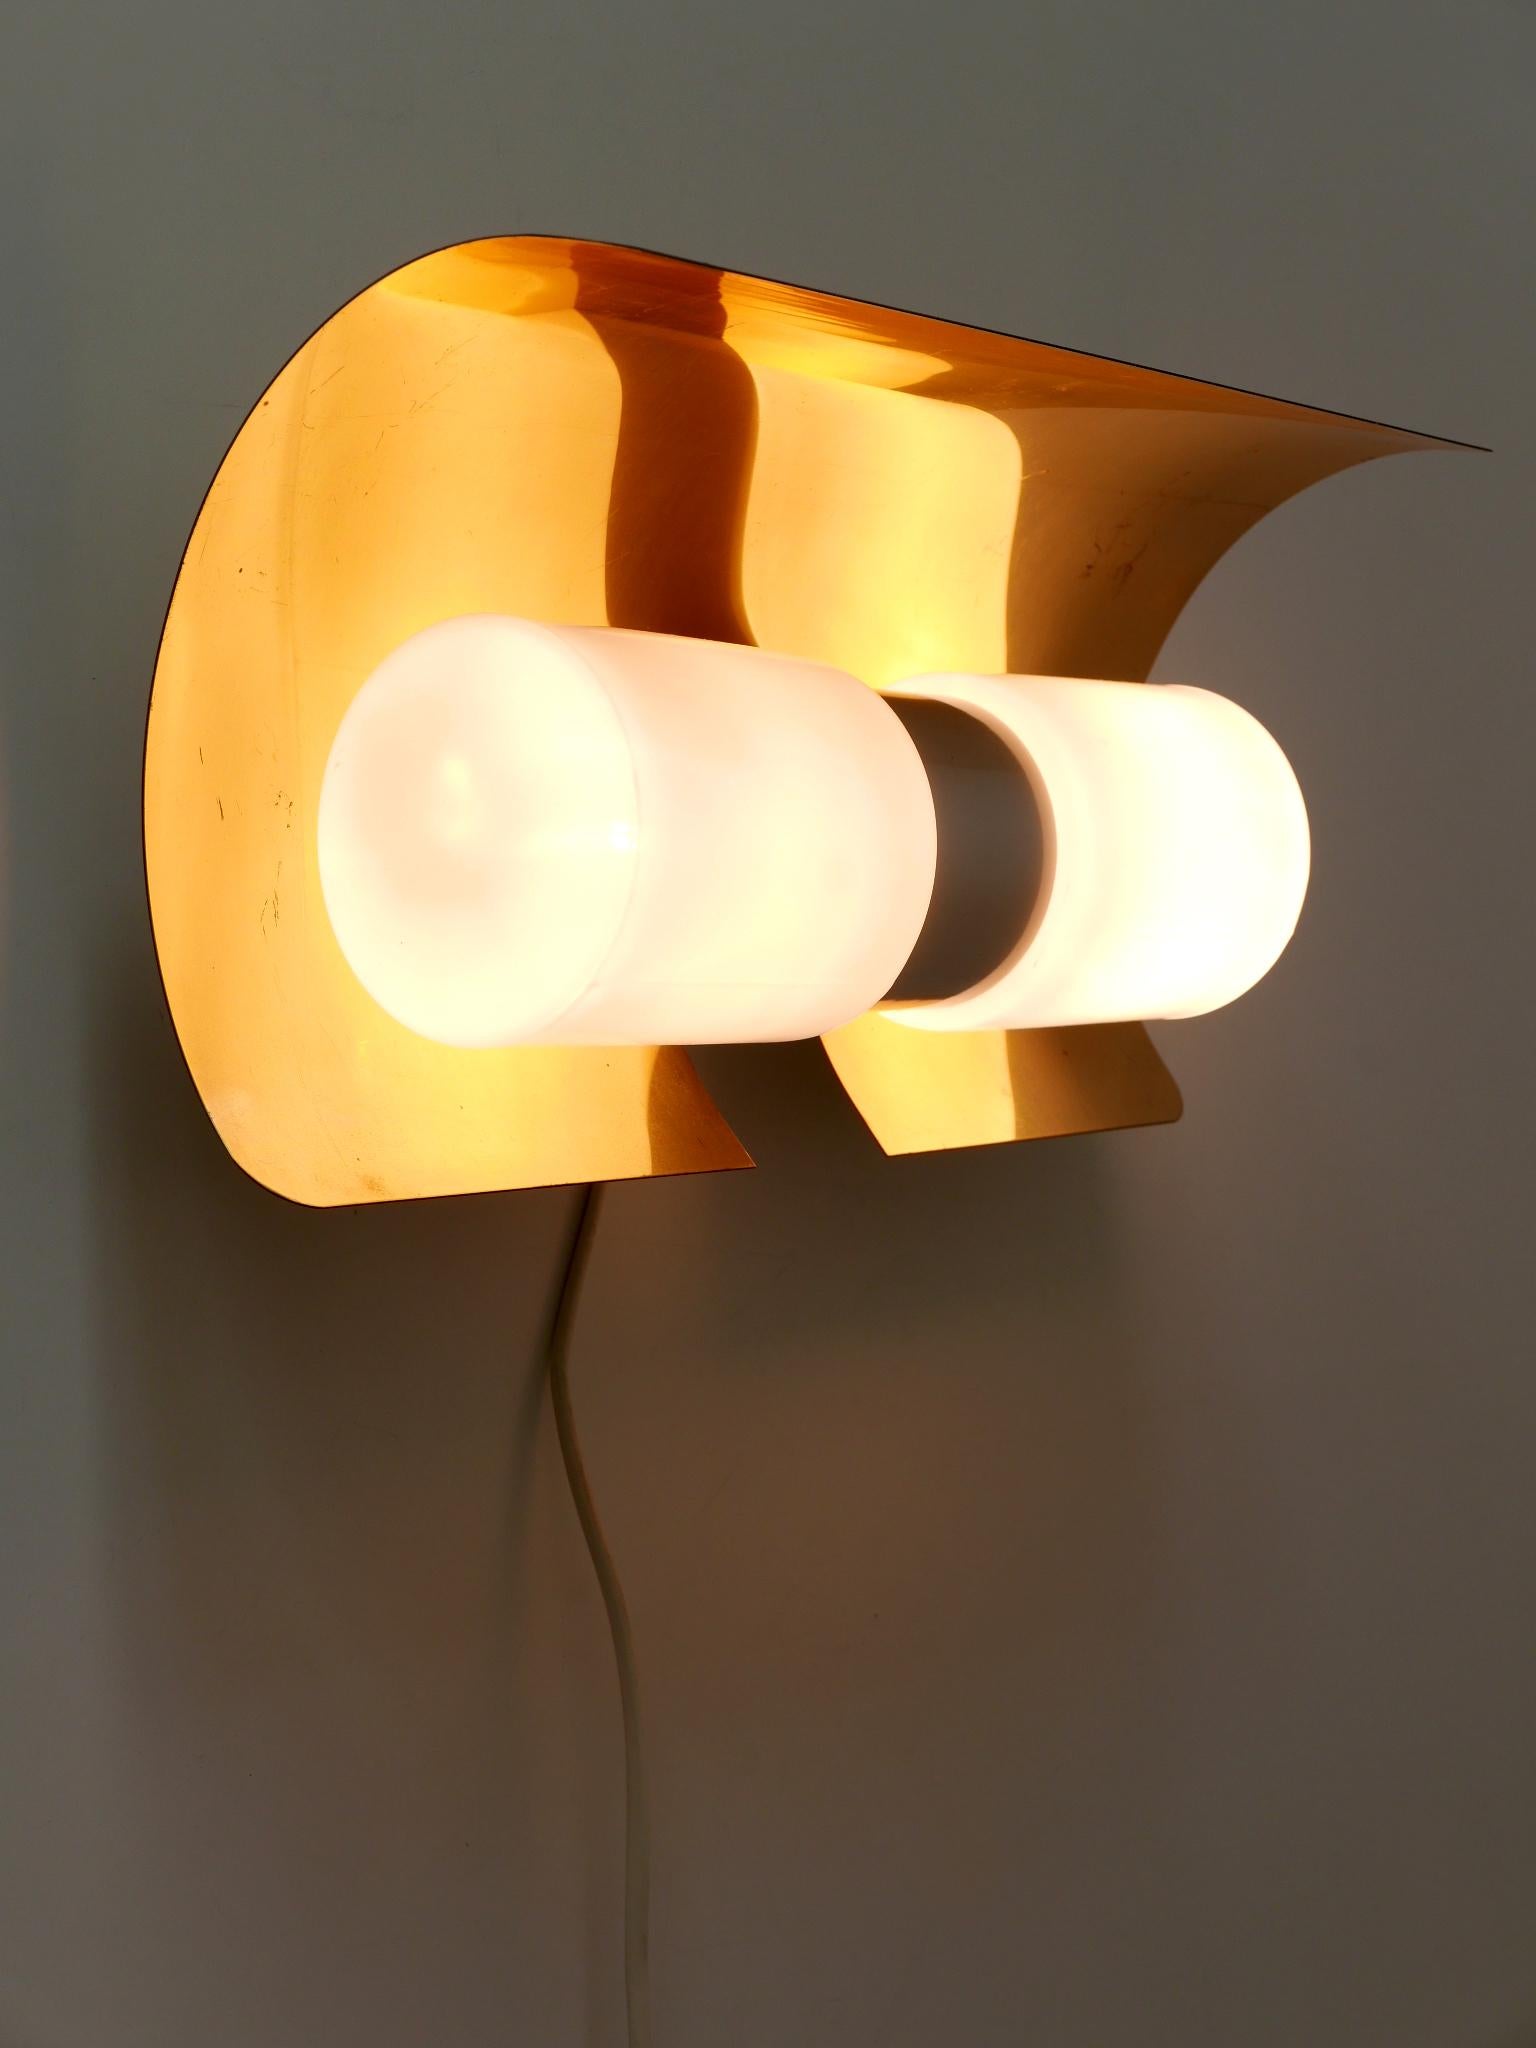 Rare Mid Century Modern Sconce by Hans-Agne Jakobsson for AB Markaryd 1950s For Sale 6